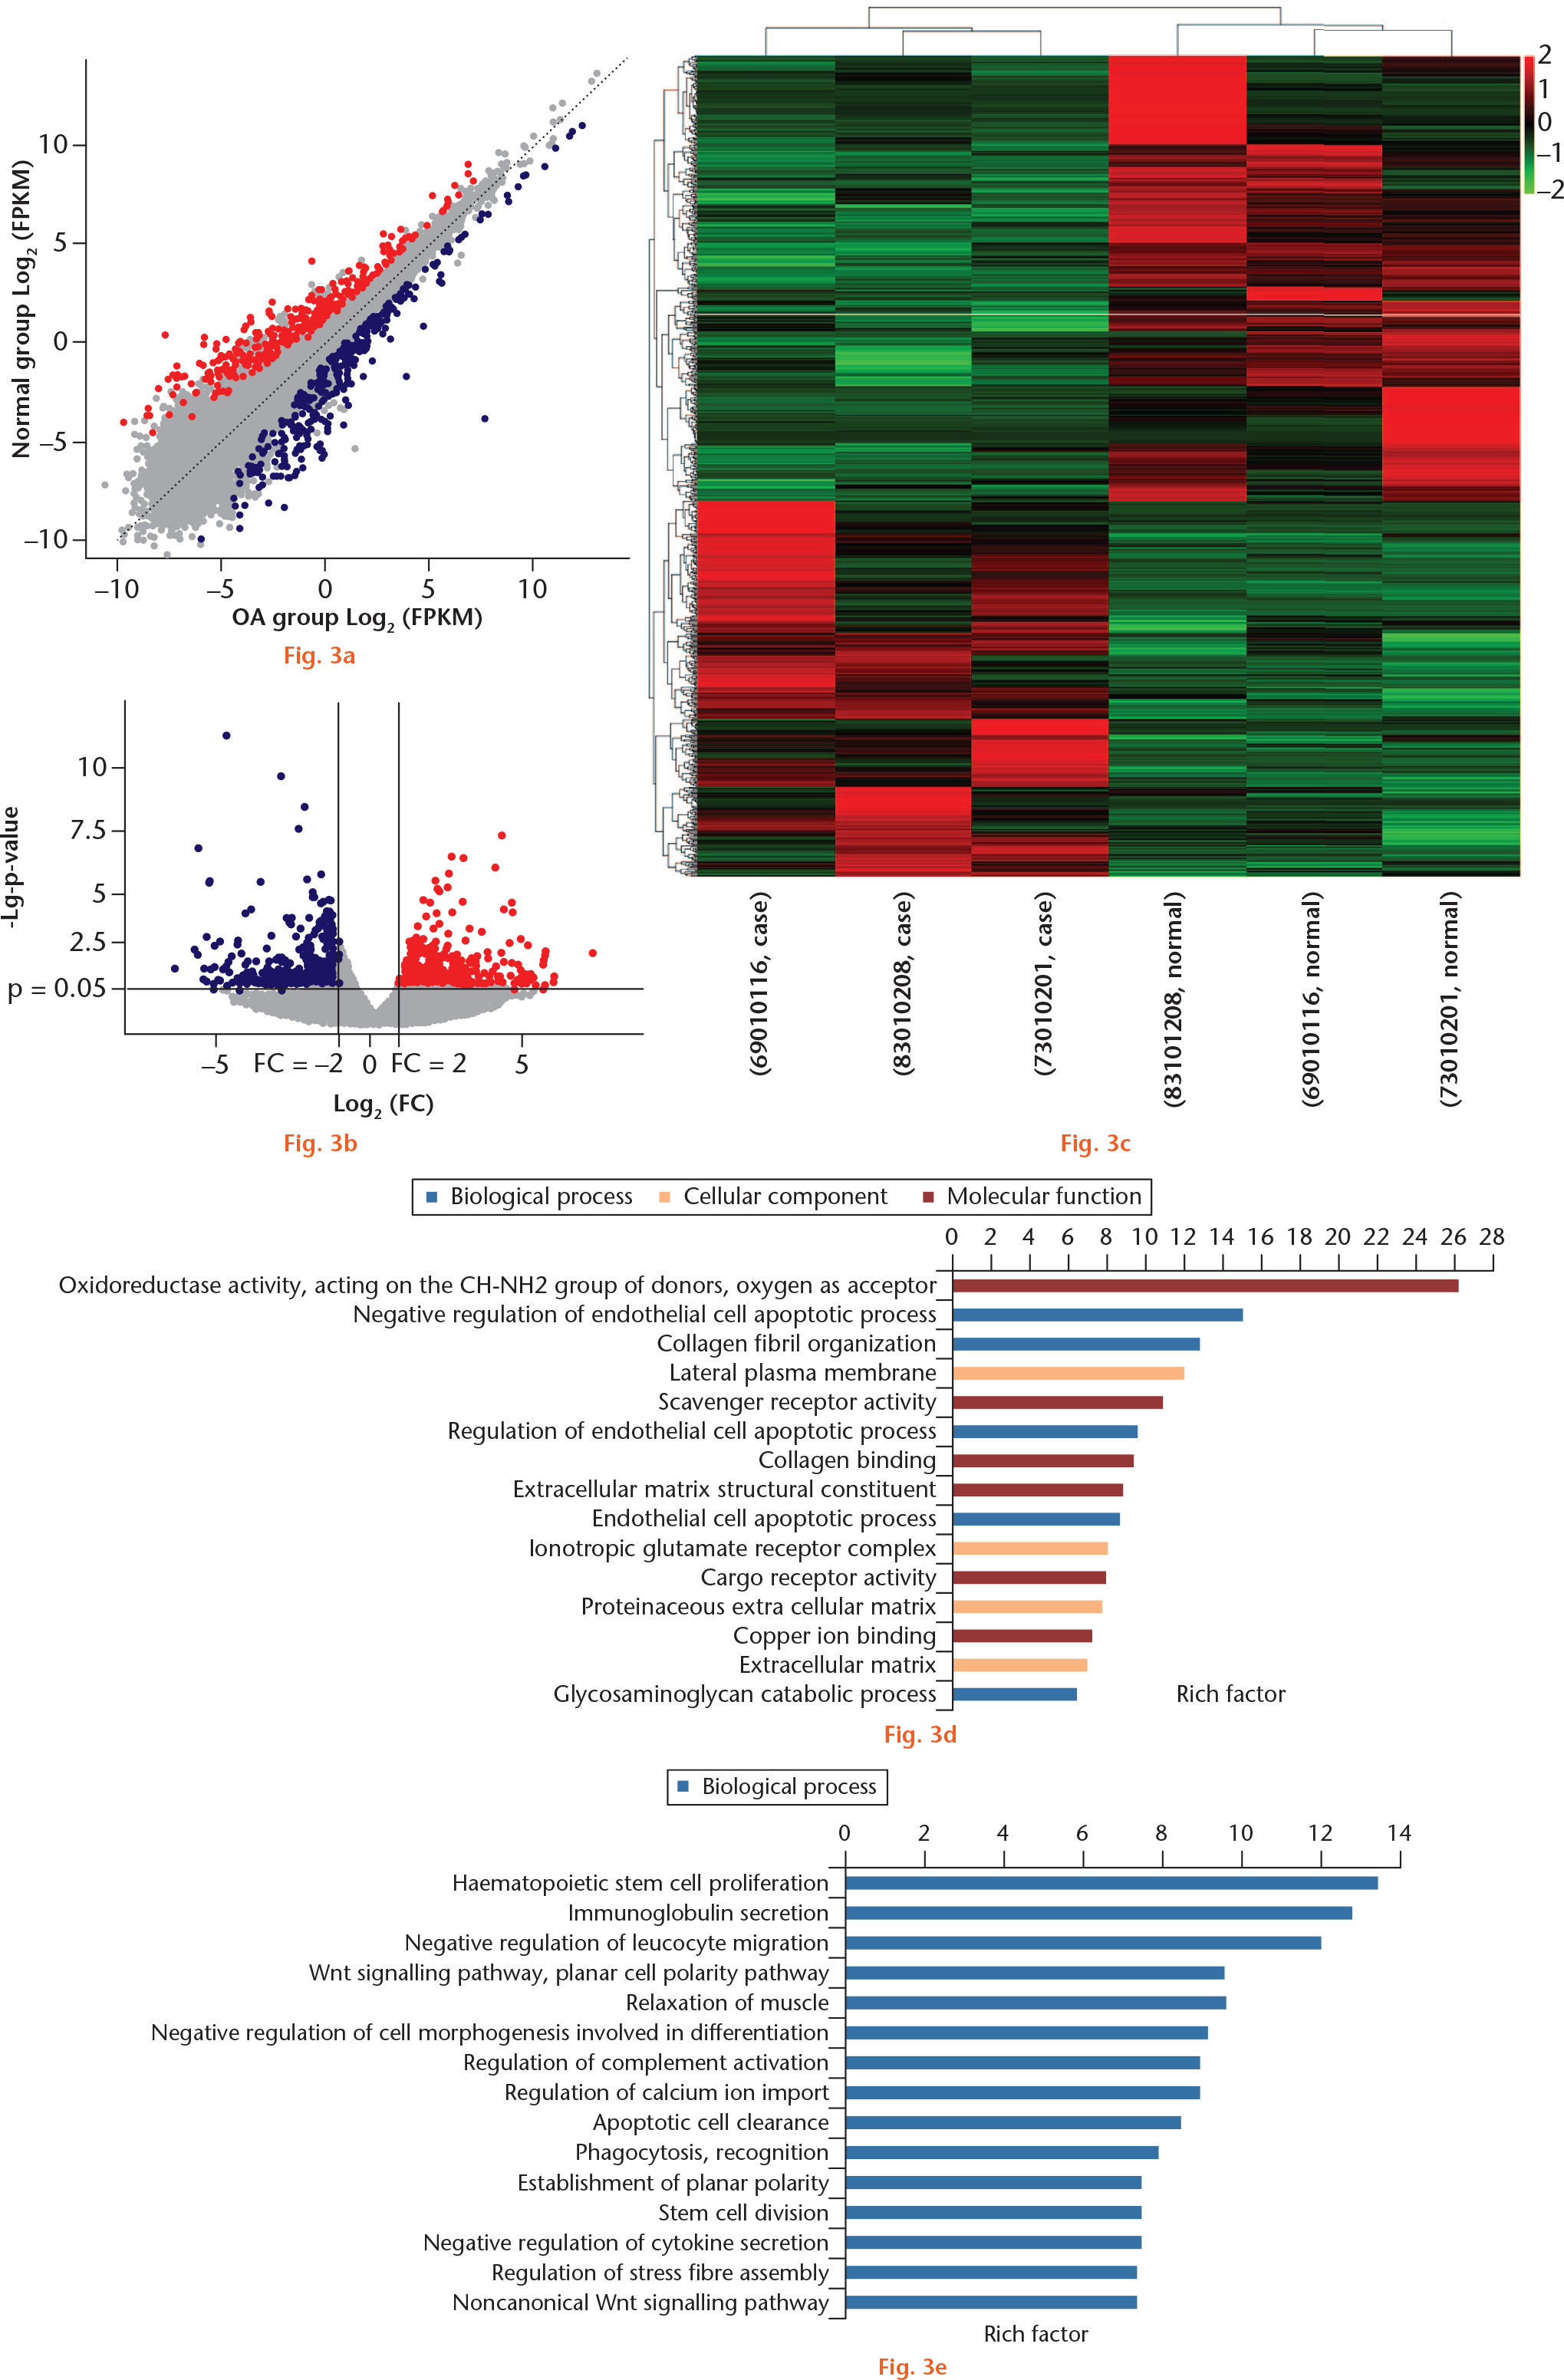 Fig. 3 
            Differentially expressed genes (DEGs) in whole-transcriptome sequencing of osteoarthritic (OA) and normal tissue of knee articular cartilage. a) Scatter plot of messenger RNA (mRNA) expression. The mRNAs, represented as red points (high level) and blue points (low level), indicated a more than two-fold change of mRNAs between control normal and OA cartilage samples. b) Volcano plot of the differentially expressed mRNAs. The red points (high level) and blue points (low level) in the plot represent the differentially expressed mRNAs with statistical significance. c) Hierarchical clustering shows a difference in mRNA expression profile between the two groups and homogeneity within groups. d) The top 15 highest enriched gene ontology (GO) terms for downregulated mRNAs in the intact cartilage. e) The top 15 highest enriched GO terms for upregulated mRNAs in the intact cartilage. FPKM, fragments per kilobase of transcript per million mapped reads; FC, fold change; ESCRT, endosomal sorting complexes required for transport; cAMP, cyclic adenosine monophosphate.
          